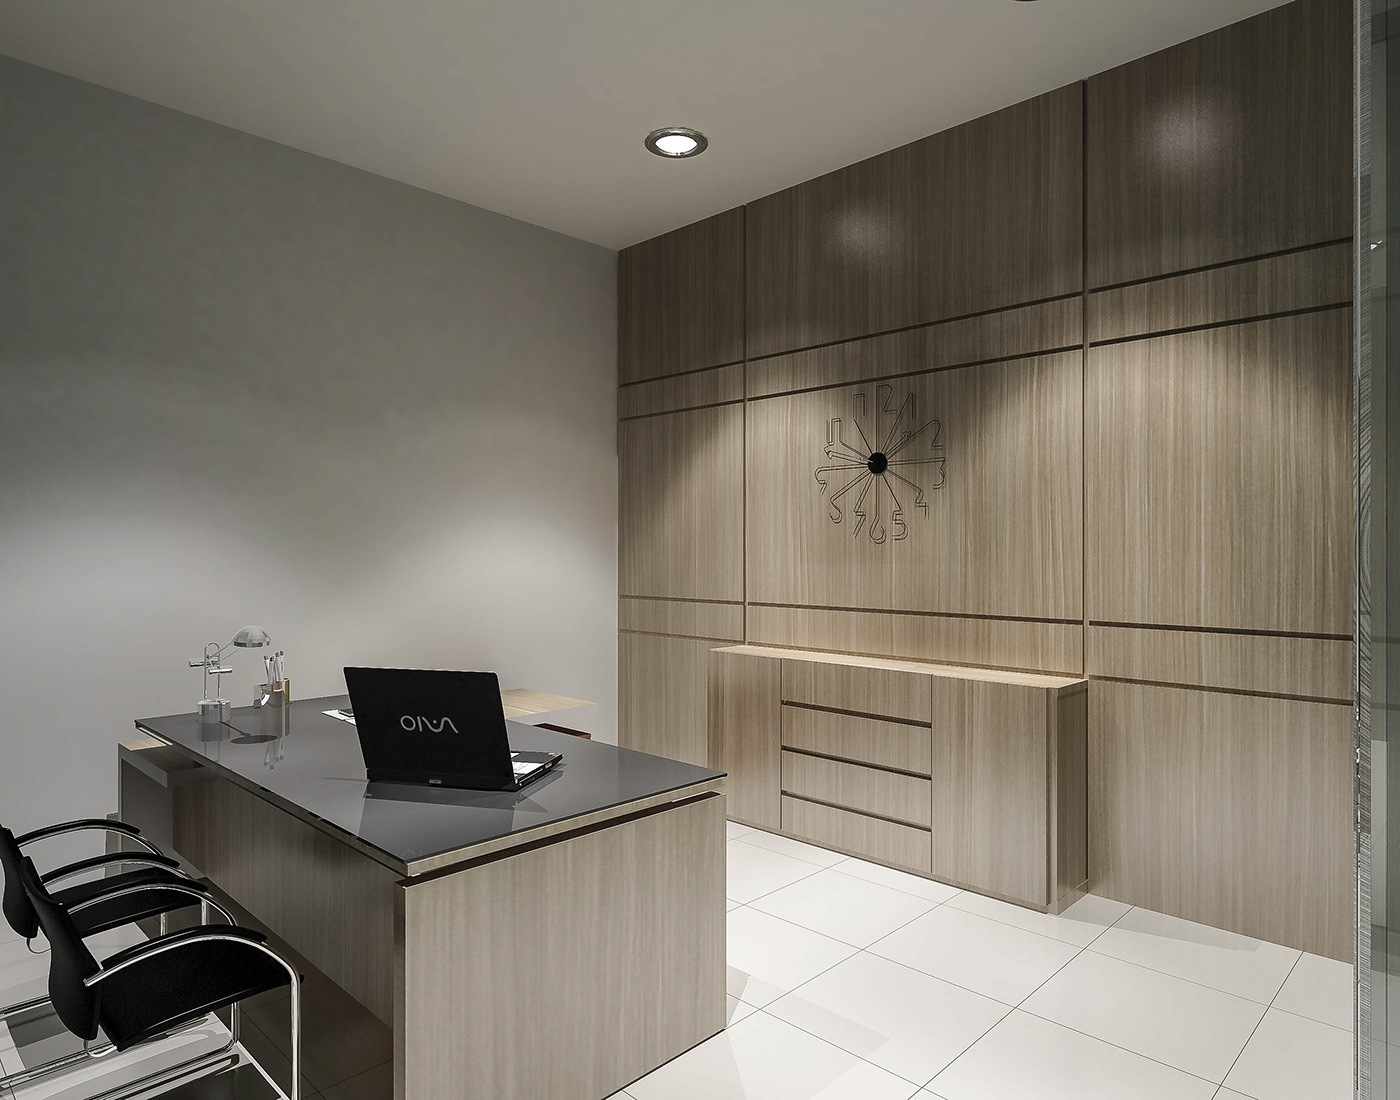 Private Office Design on Behance
